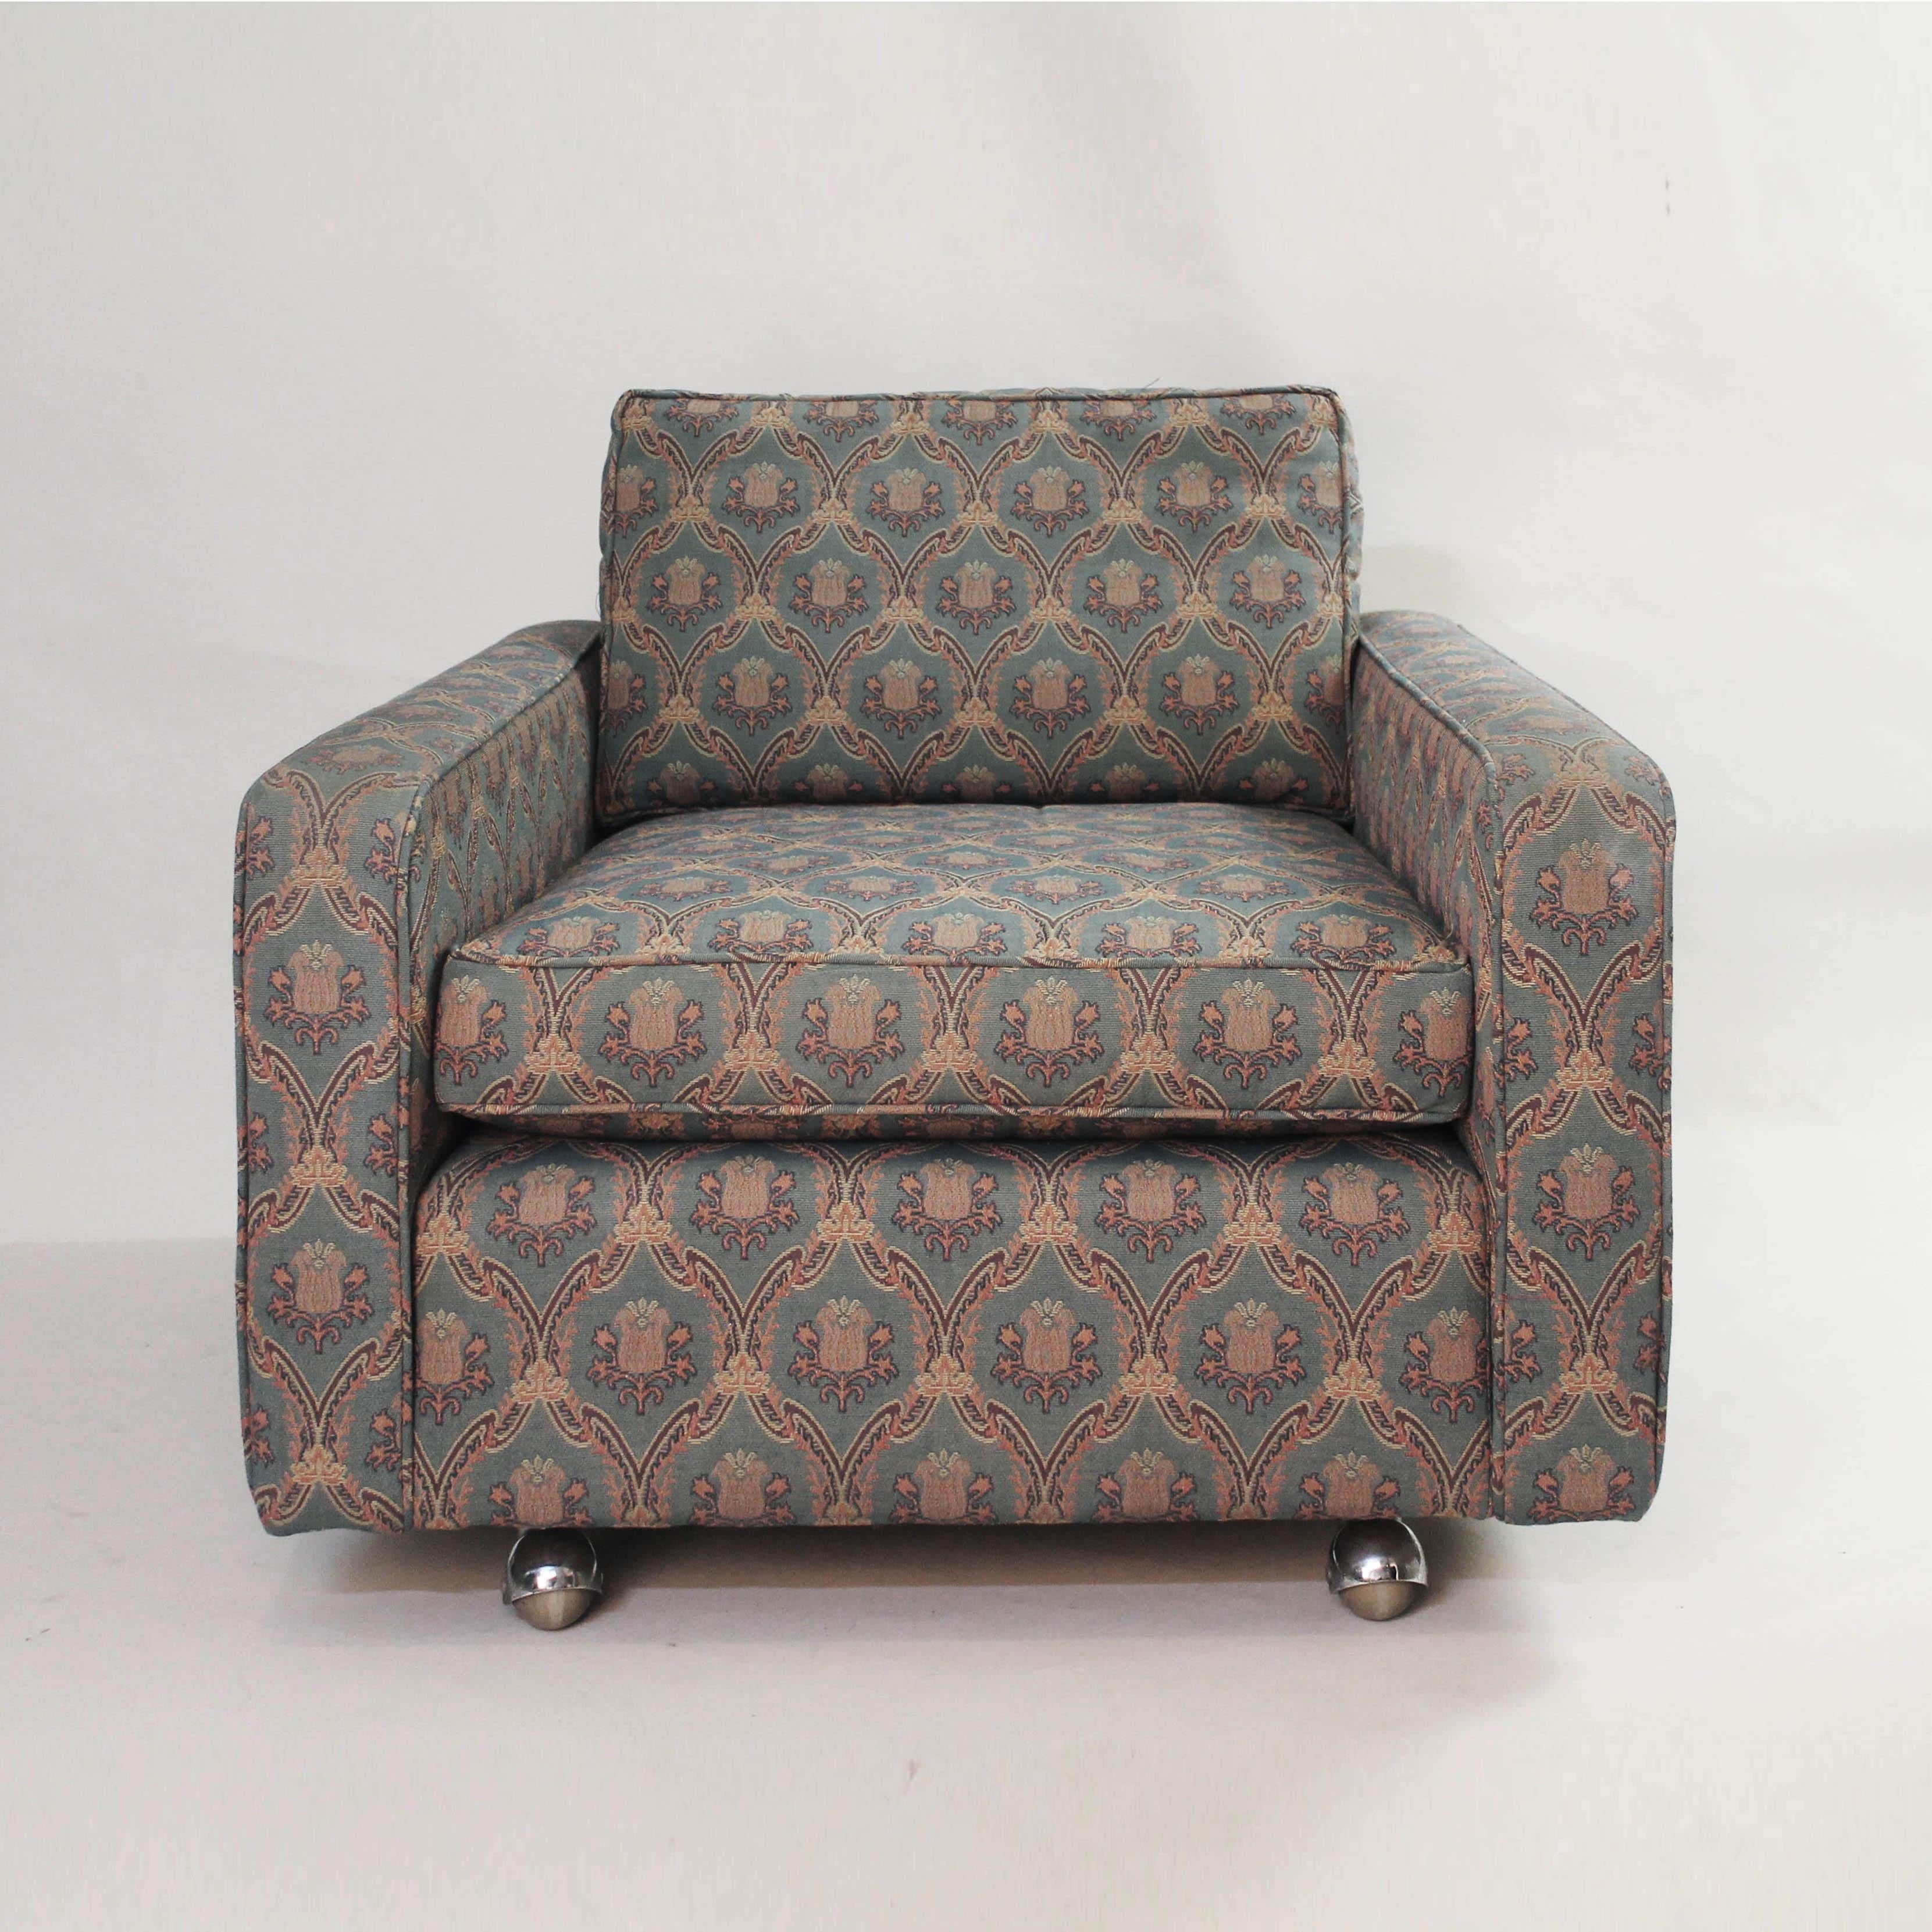 Edward Wormley lounge armchair for Dunbar on four chrome ball wheels. The armchair needs reupholstery and some love. In house upholstery available. The perfect armchair to upholster in the fabric that matches your interiors. 
Also available, a